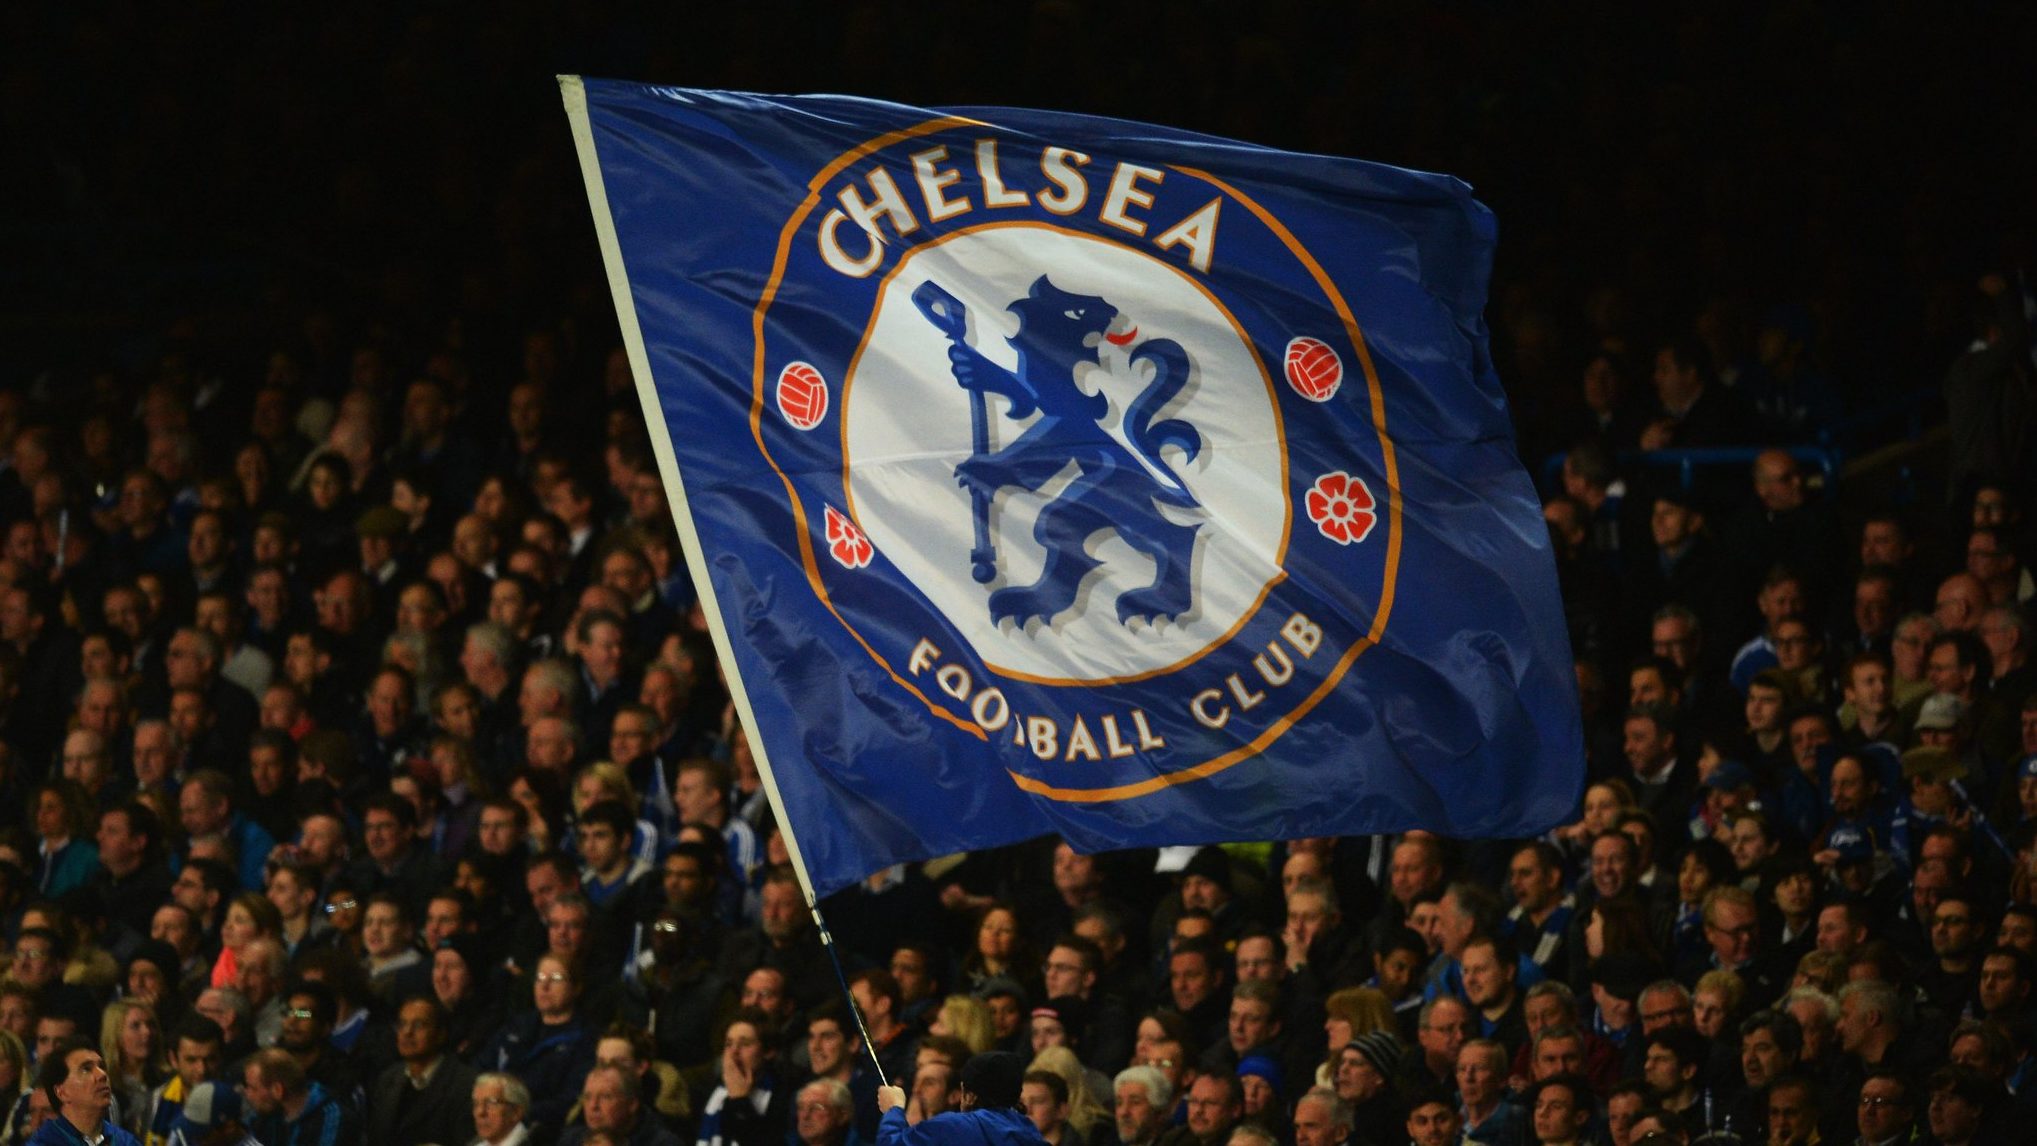 Saudi Media Company Trying To Buy Chelsea Football Club From Sanctioned Russian Billionaire